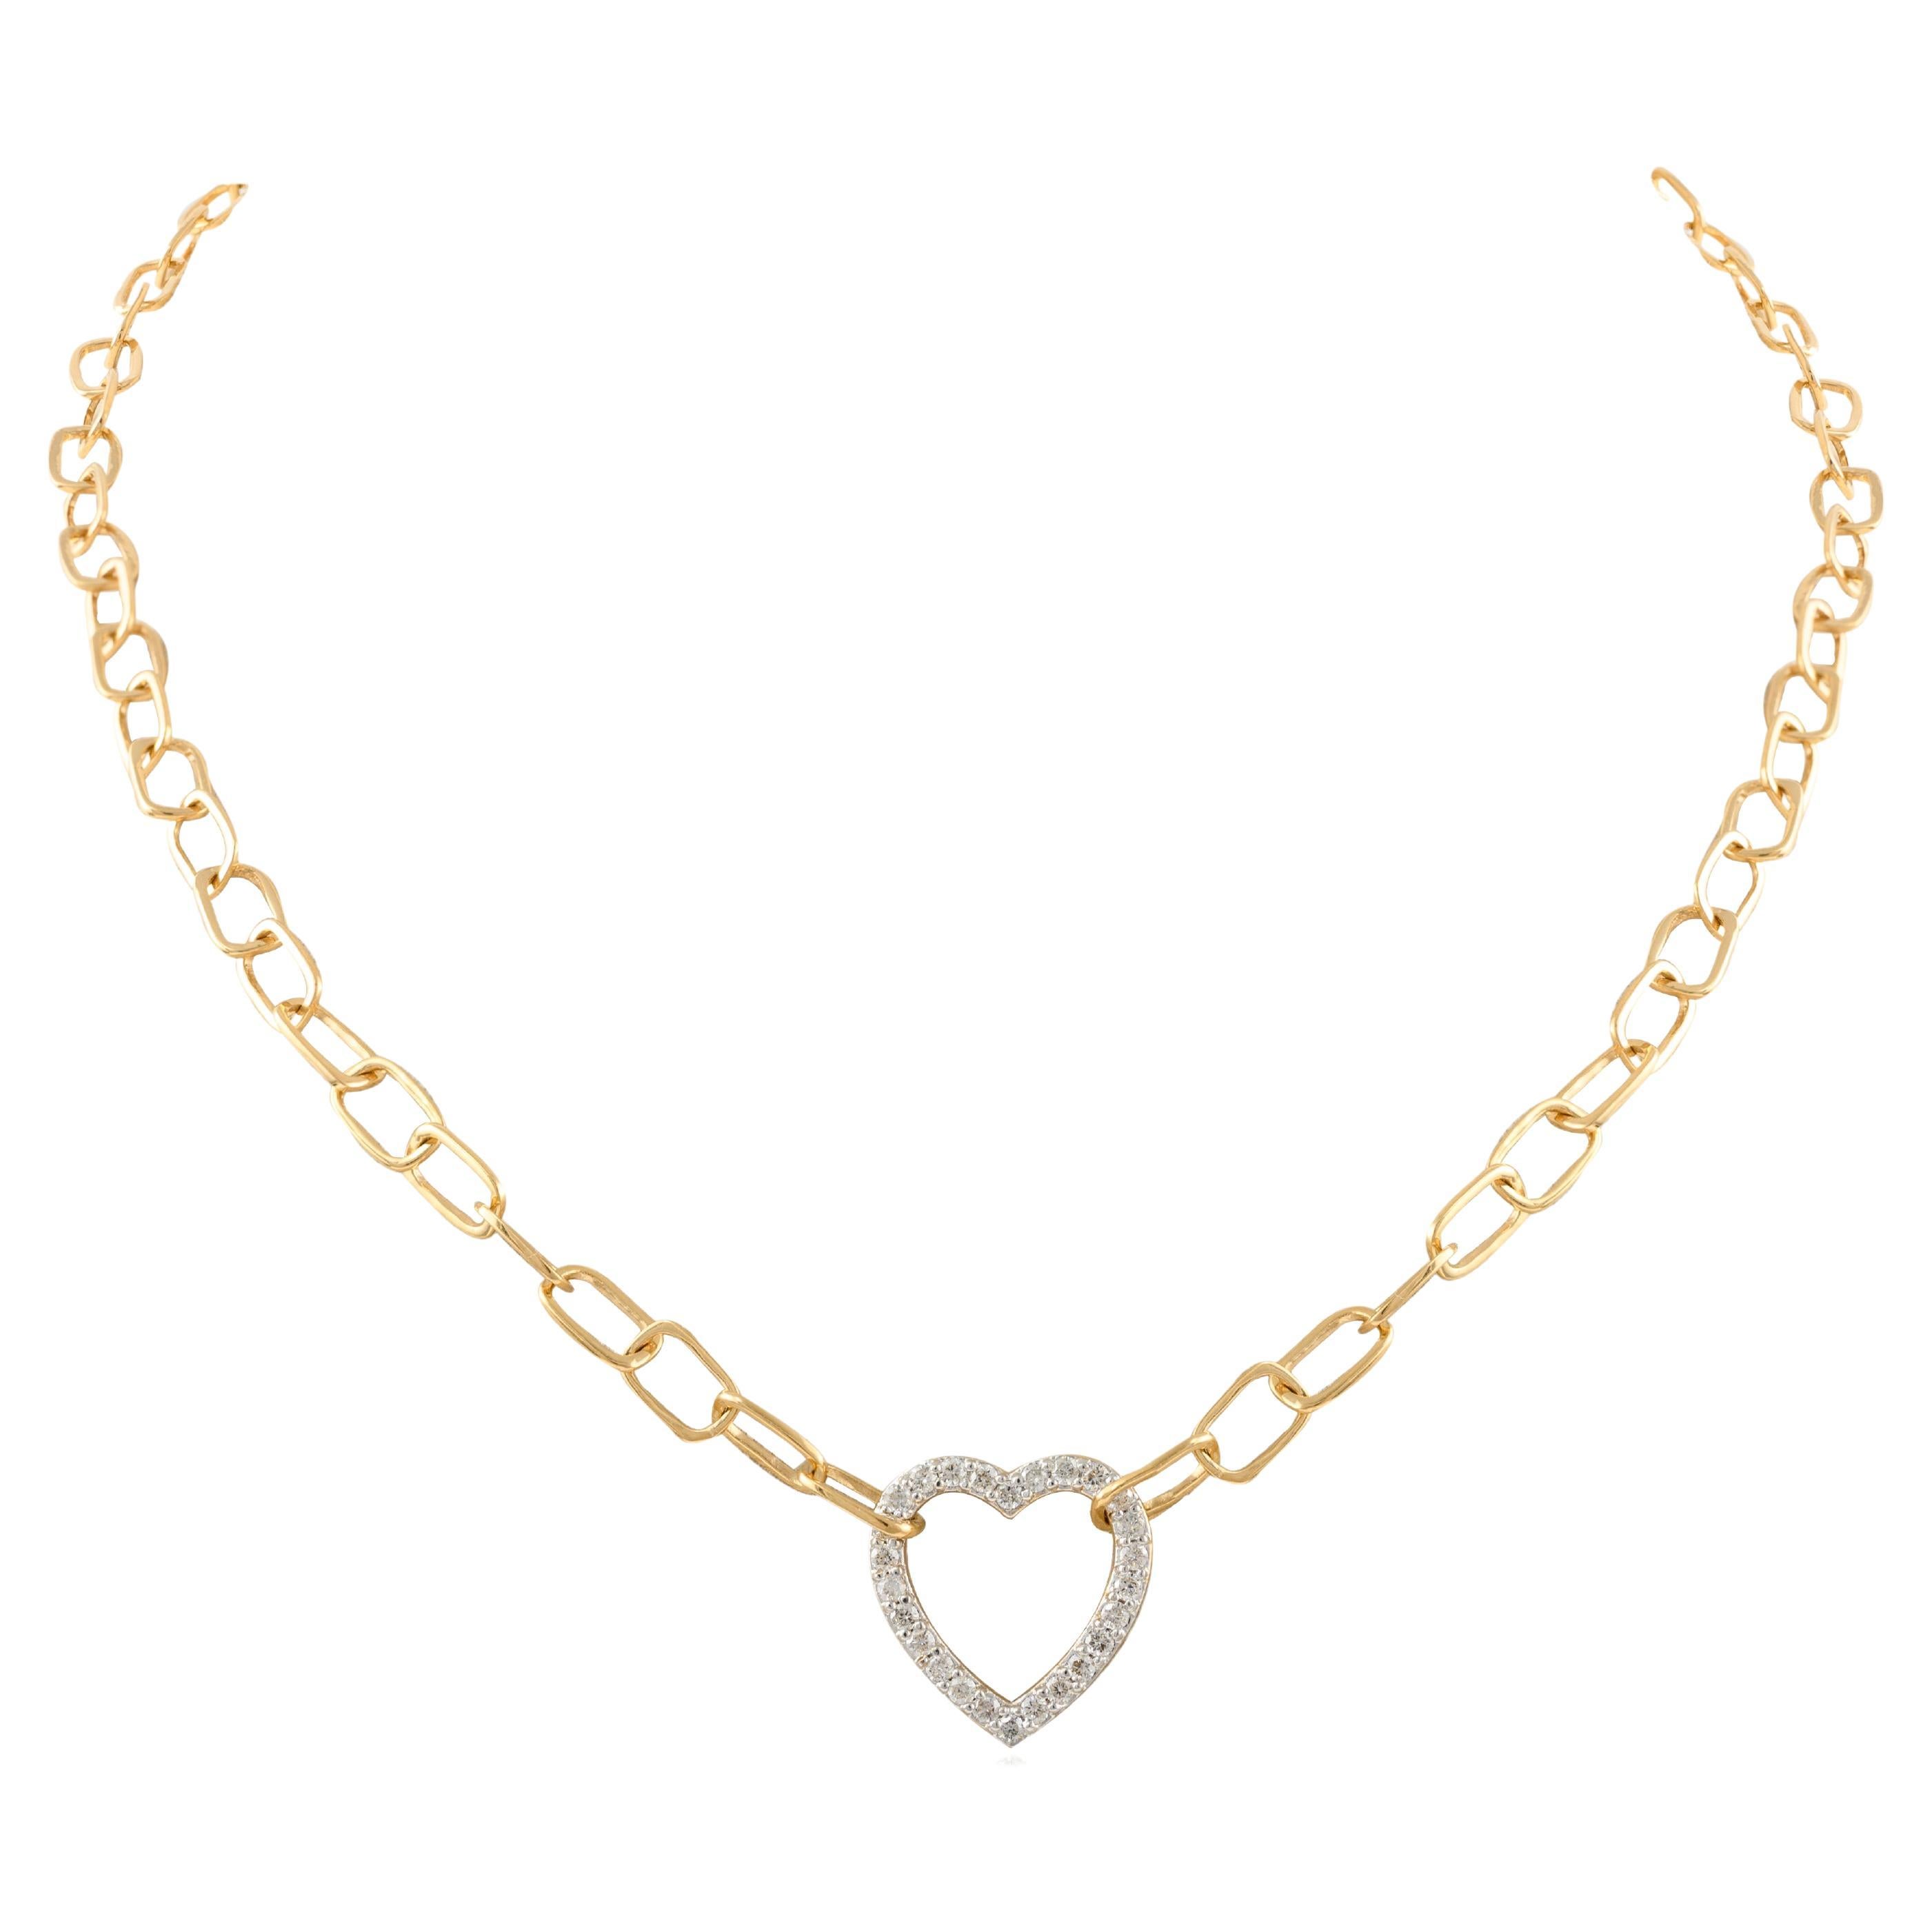 Paperclip Chain Diamond Heart Necklace 18k Solid Yellow Gold, Bridesmaid Gift